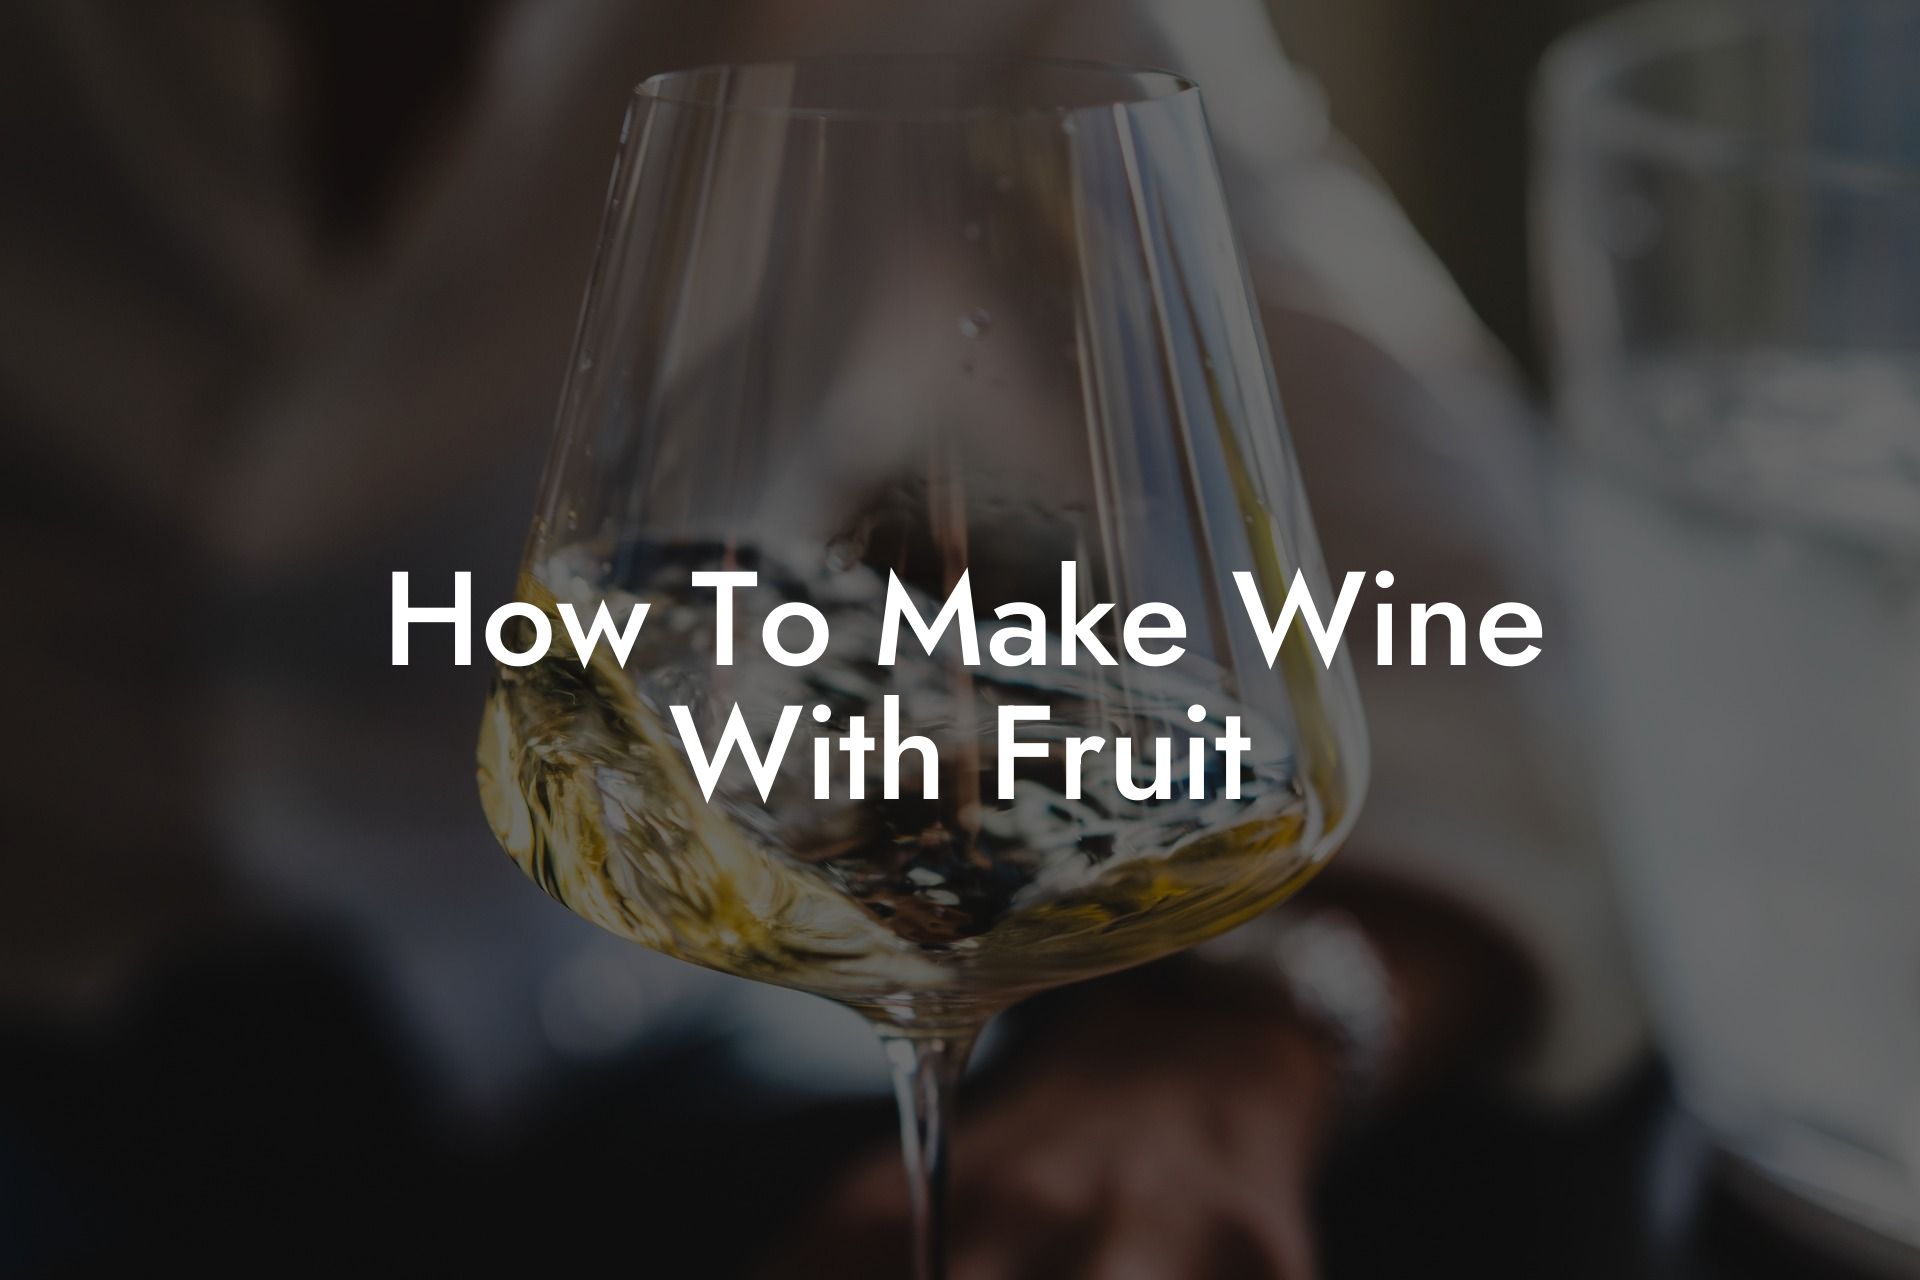 How To Make Wine With Fruit